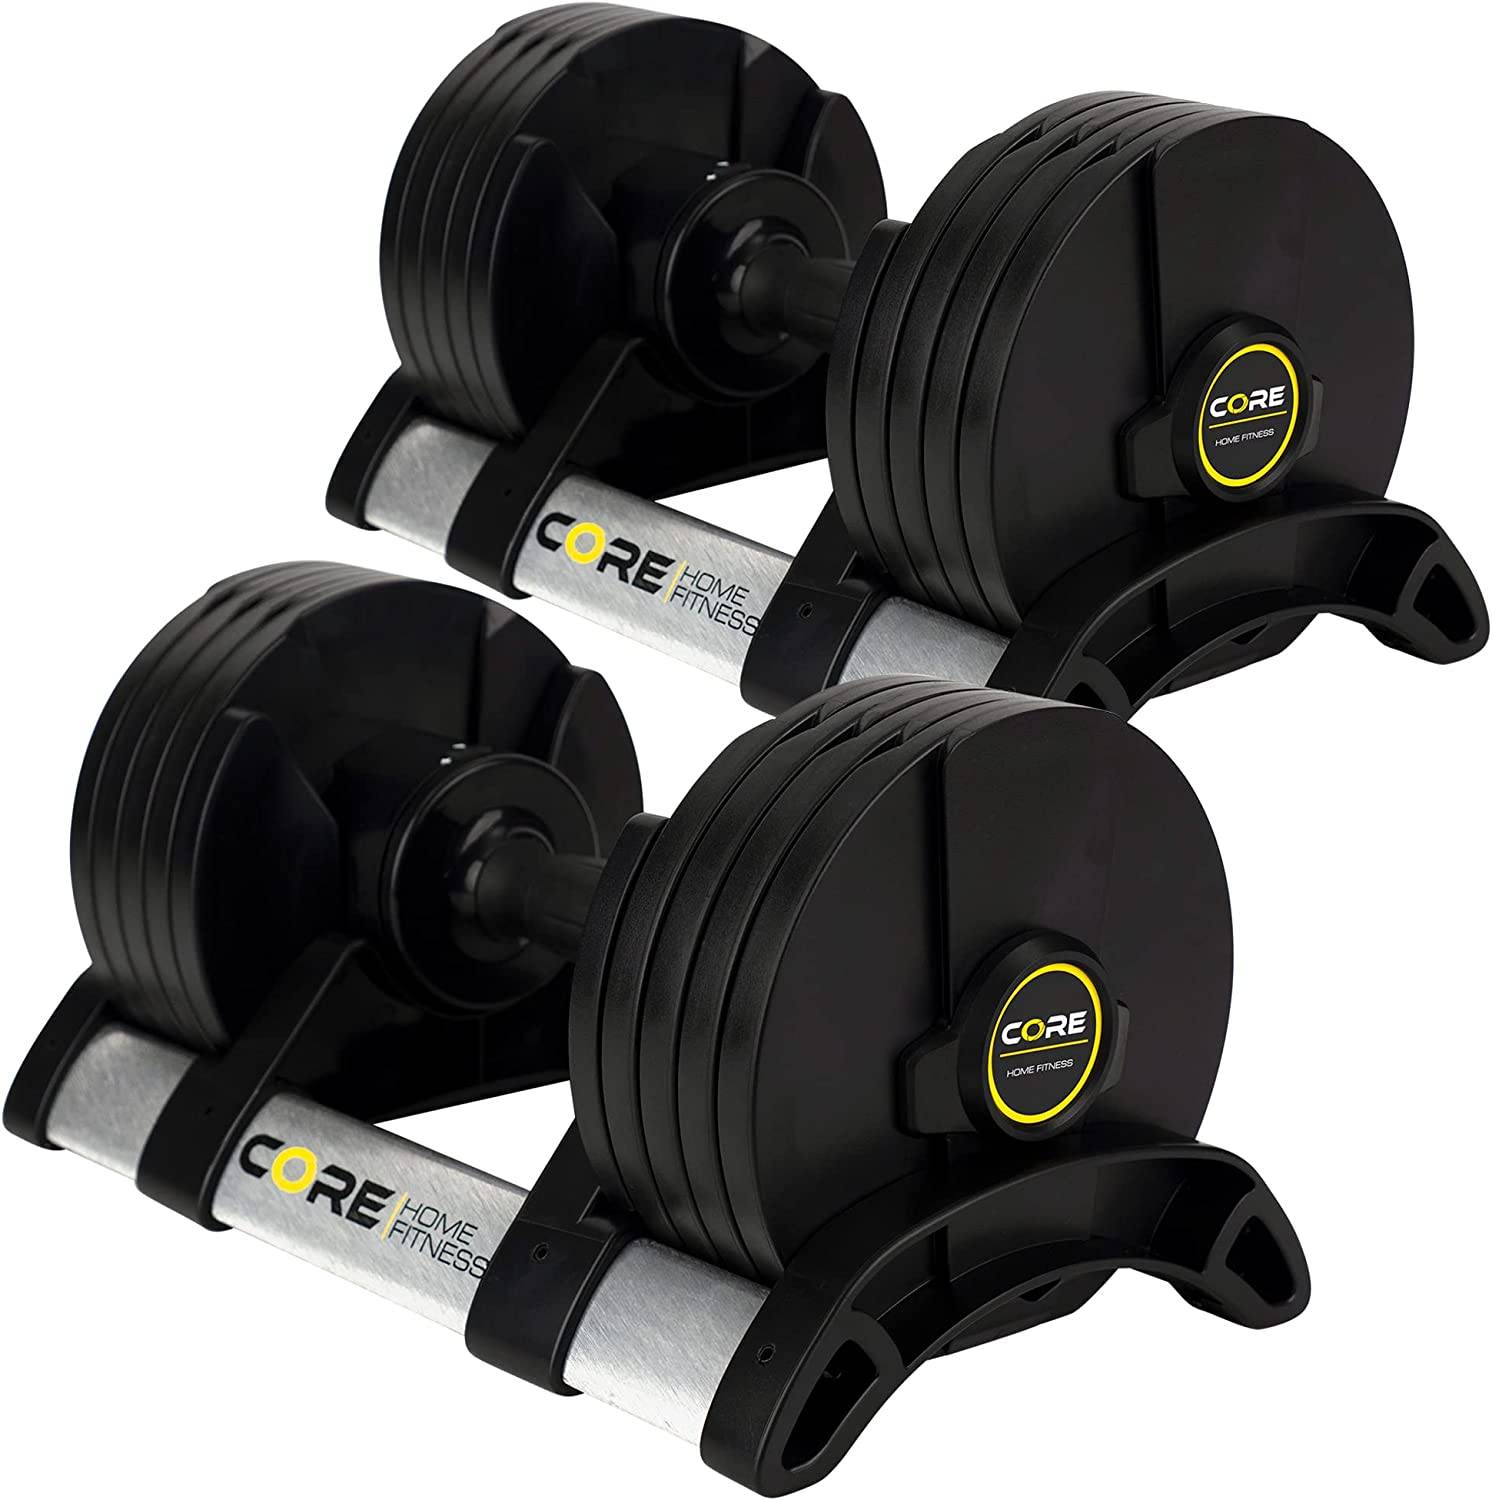 Core Home Dumbbell Set Review – Torokhtiy Weightlifting